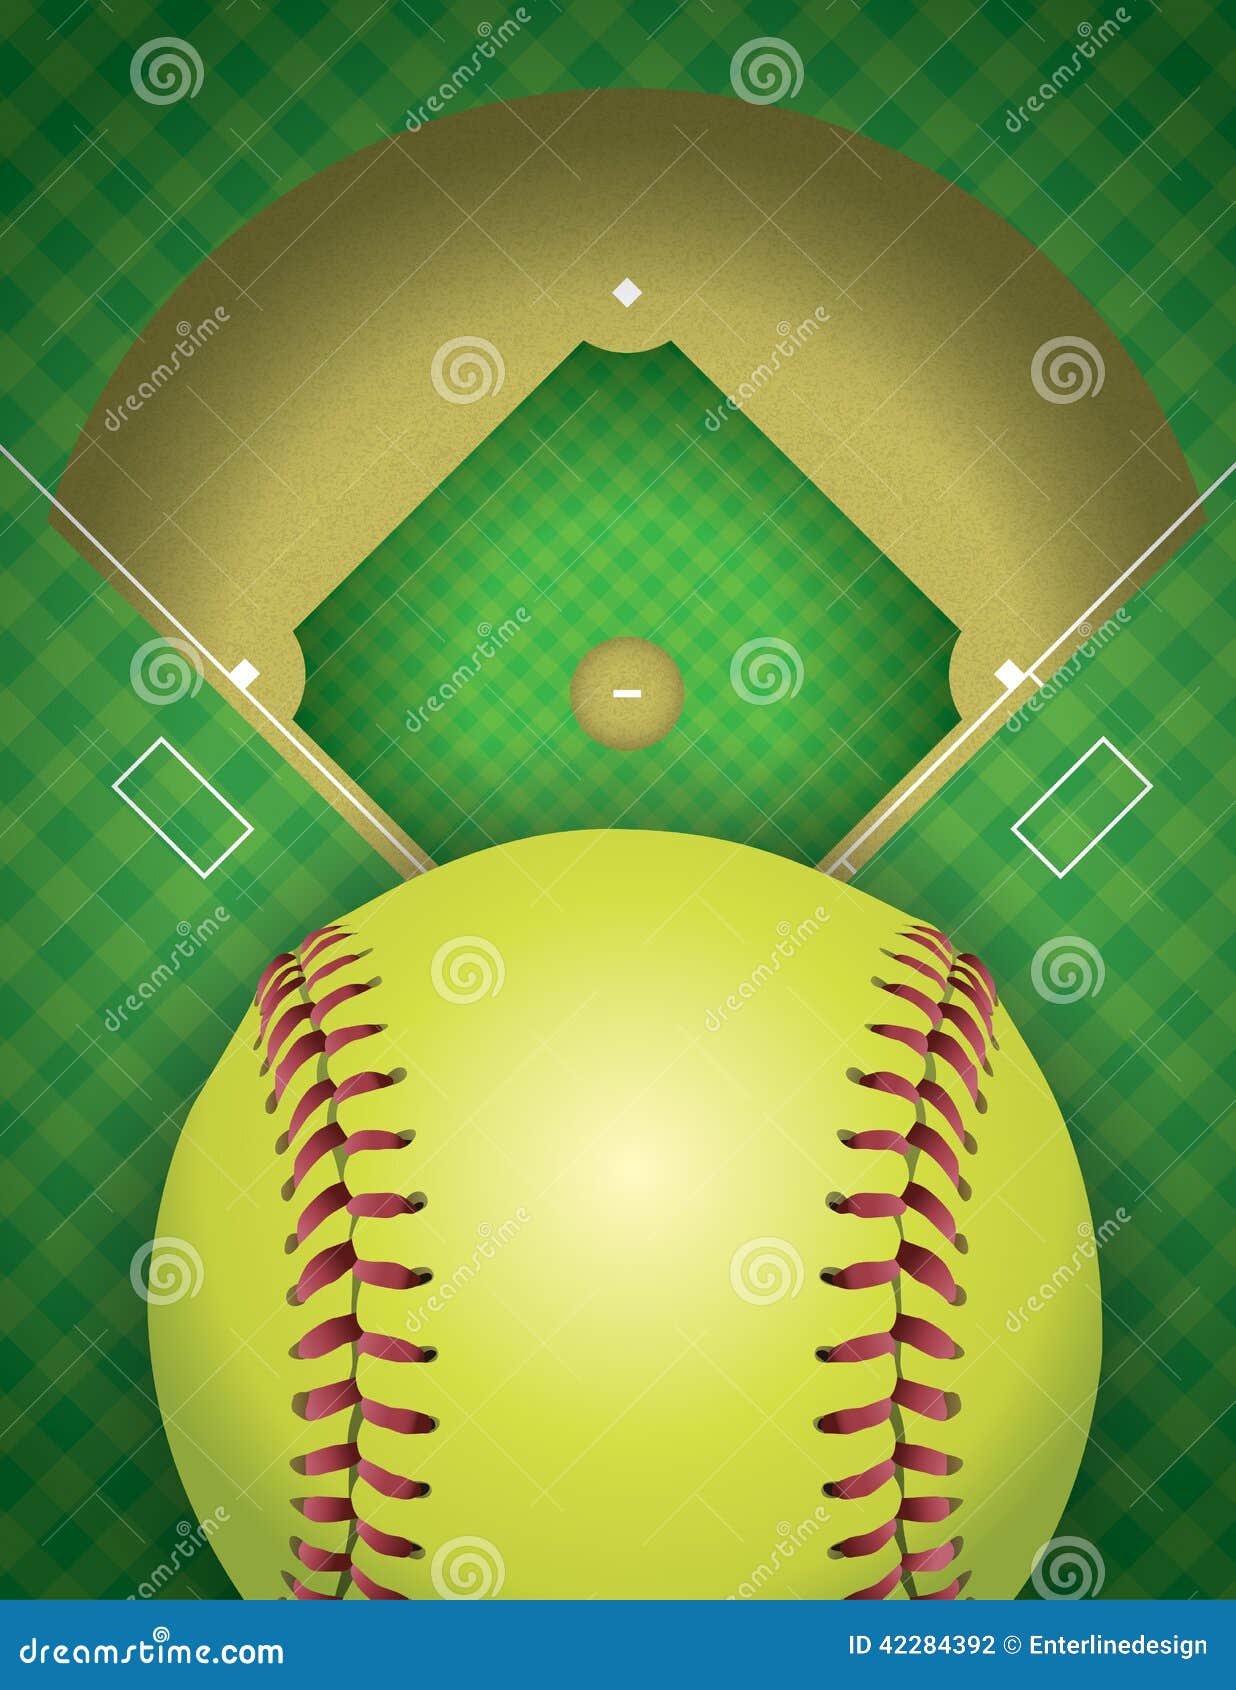 Softball Field And Ball Background Illustration Stock Vector - Image